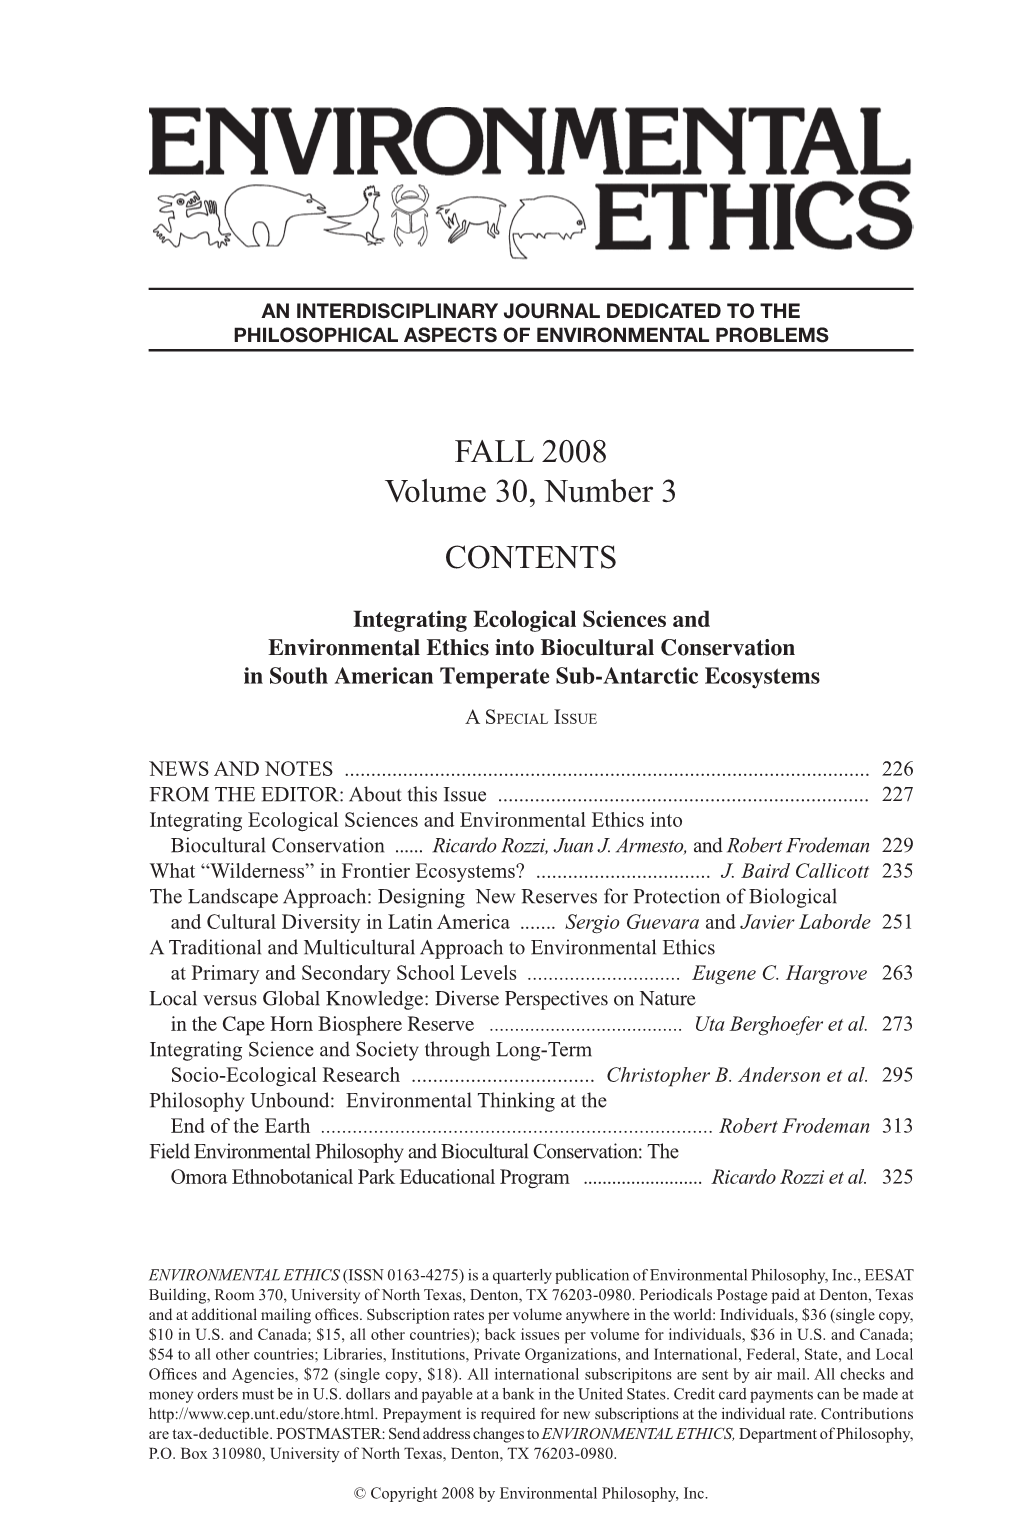 FALL 2008 Volume 30, Number 3 CONTENTS